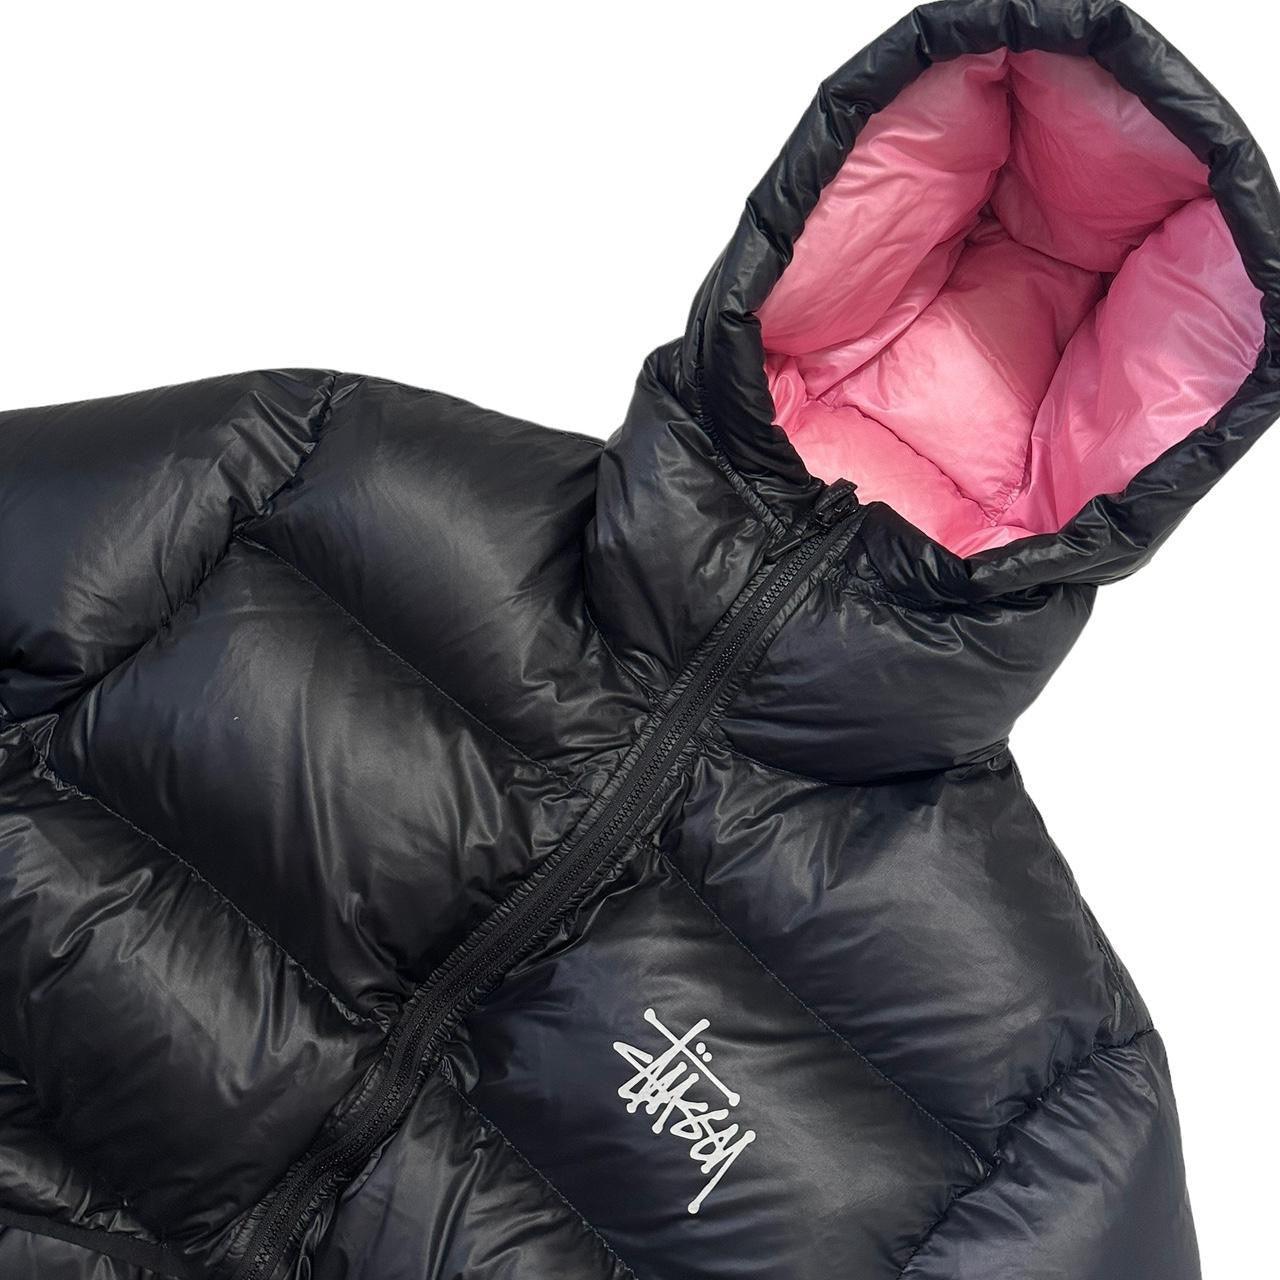 Stussy Micro Ripstop Down Parka Puffer Jacket - Known Source